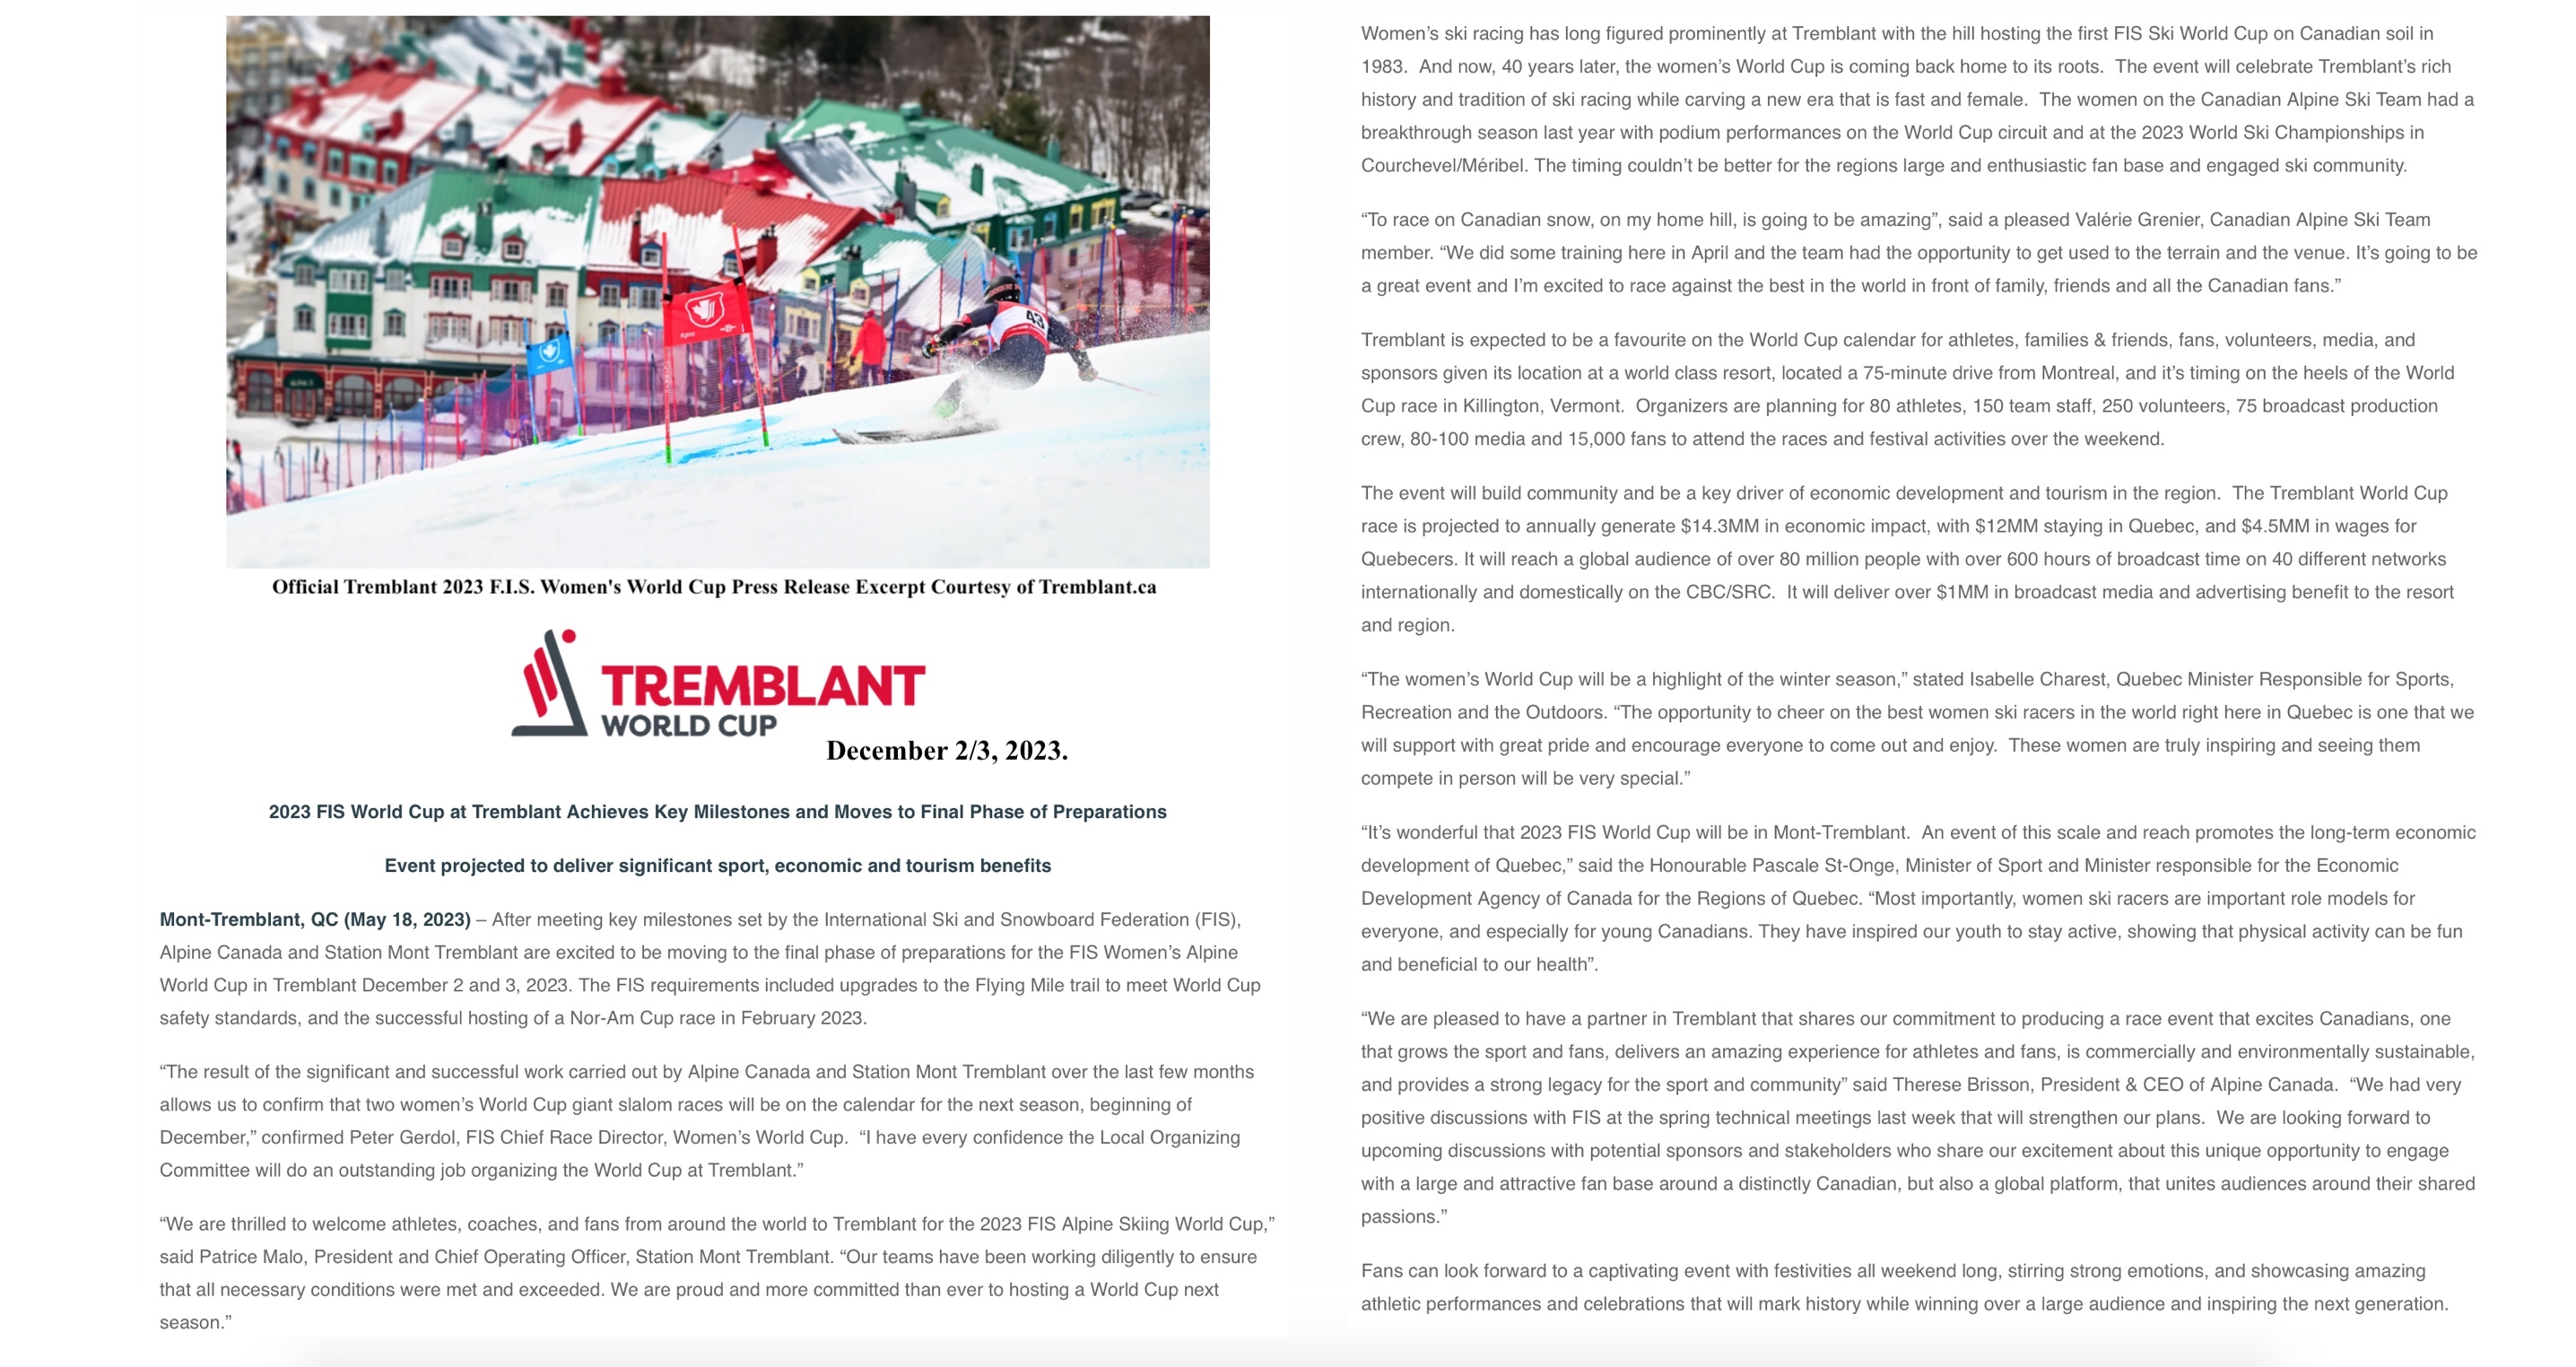 5.18.23.Tremblant.F.I.S.Womens.G.S.World.Cup.Event.Event.Detail.E.jpg